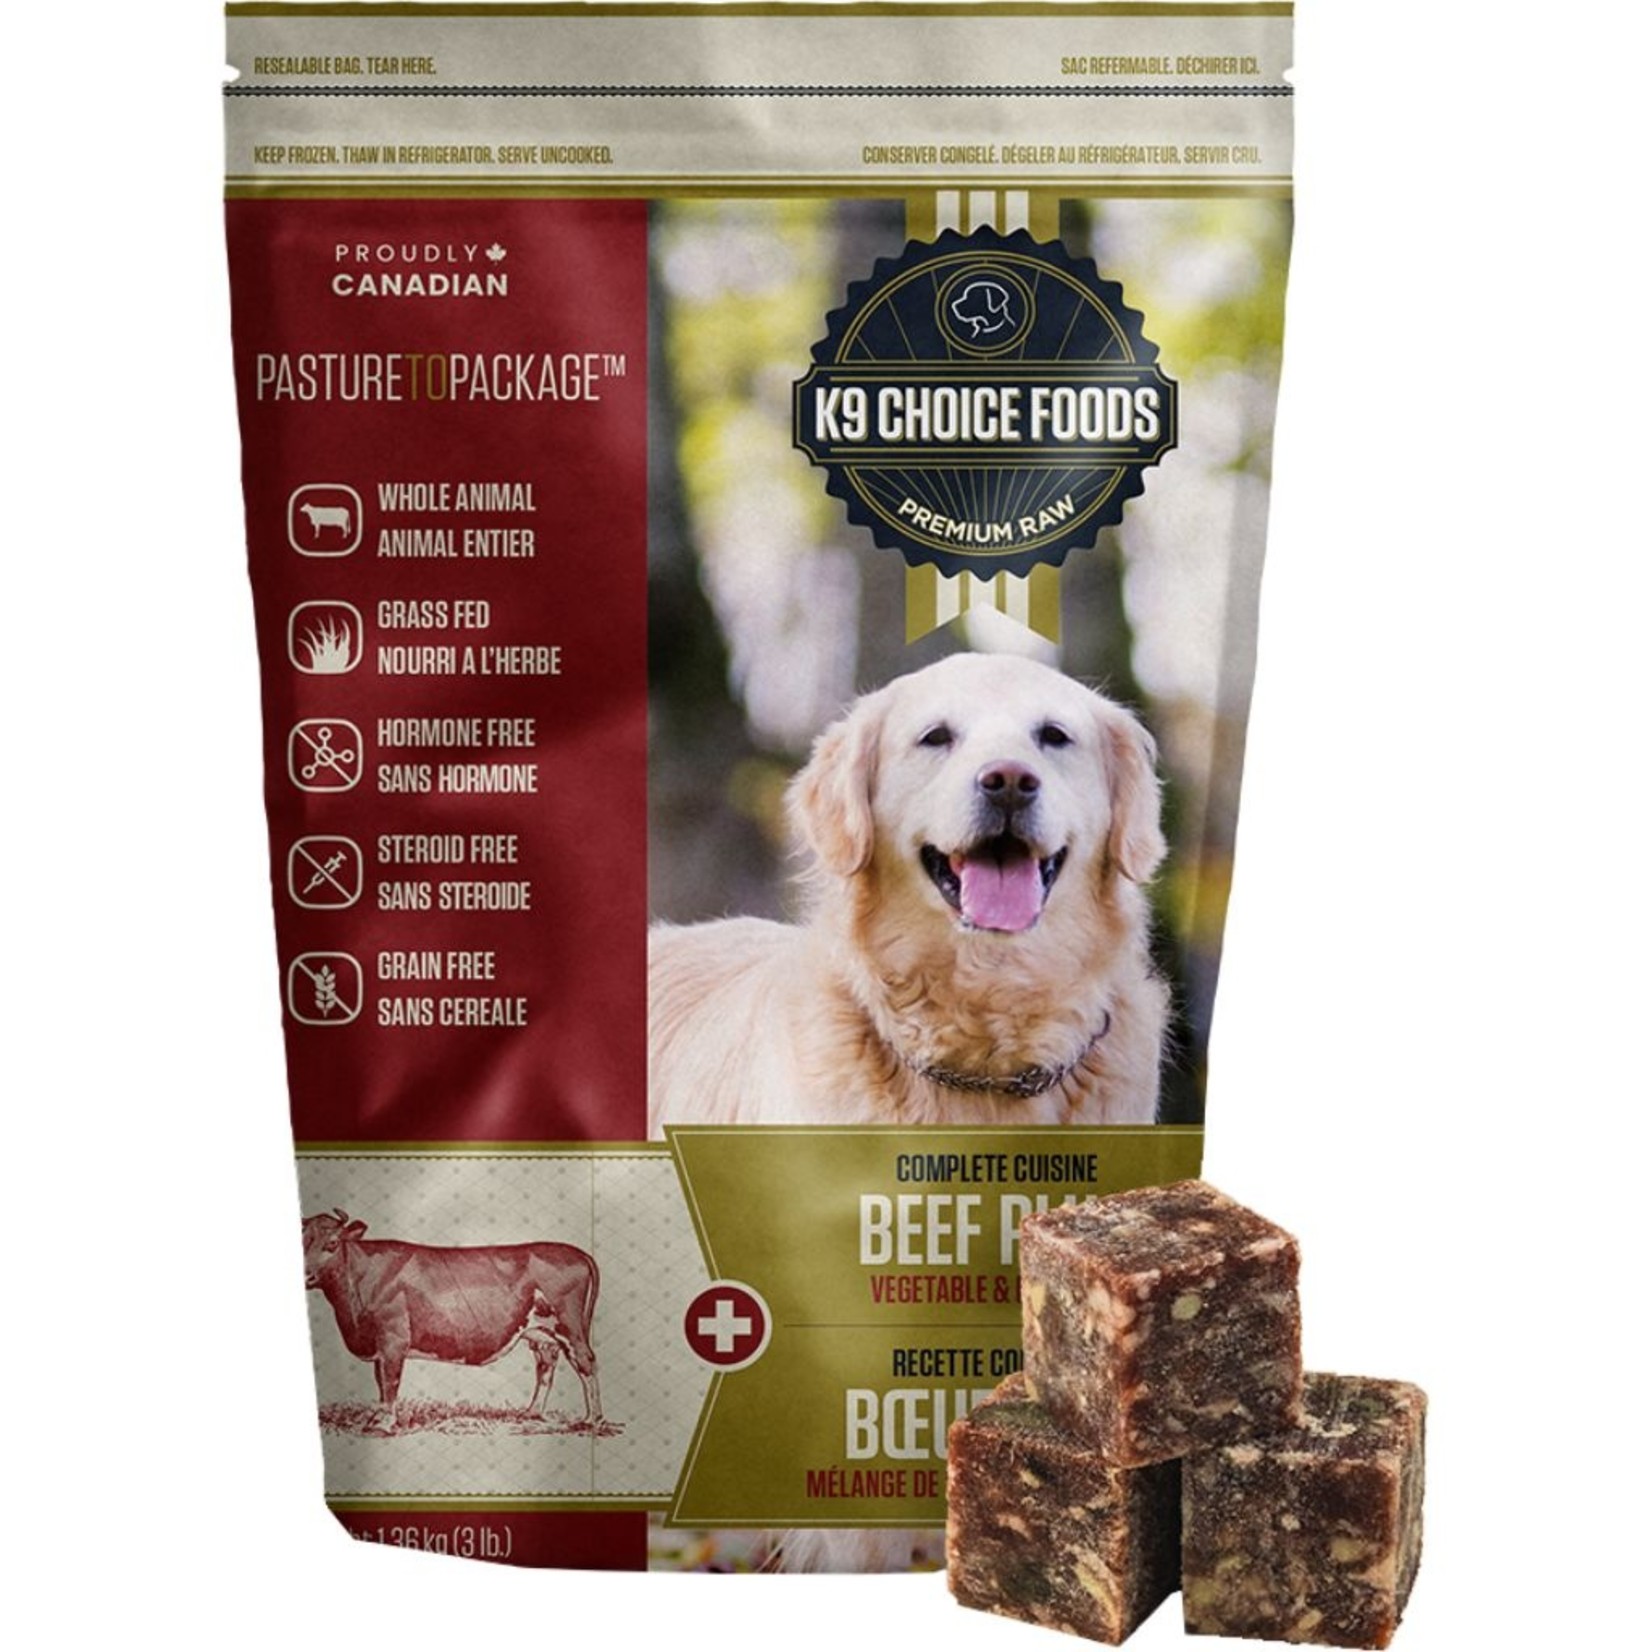 AVAILABLE IN-STORE K9 choice frozen raw pieces beef 3lb